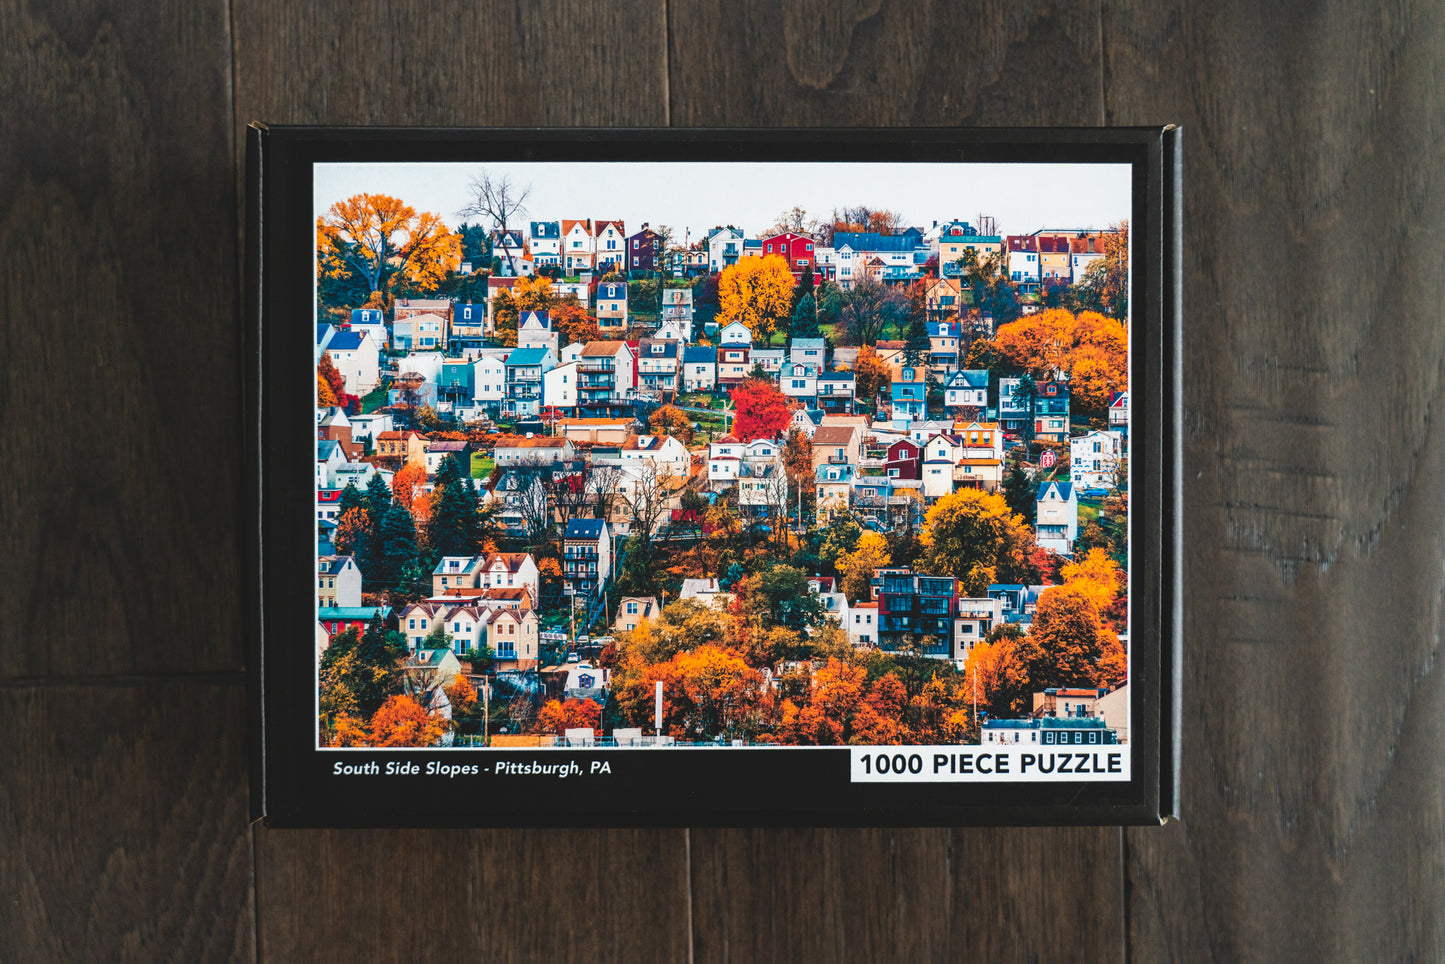 South Side Slopes Jigsaw Puzzle - 1000 Pieces